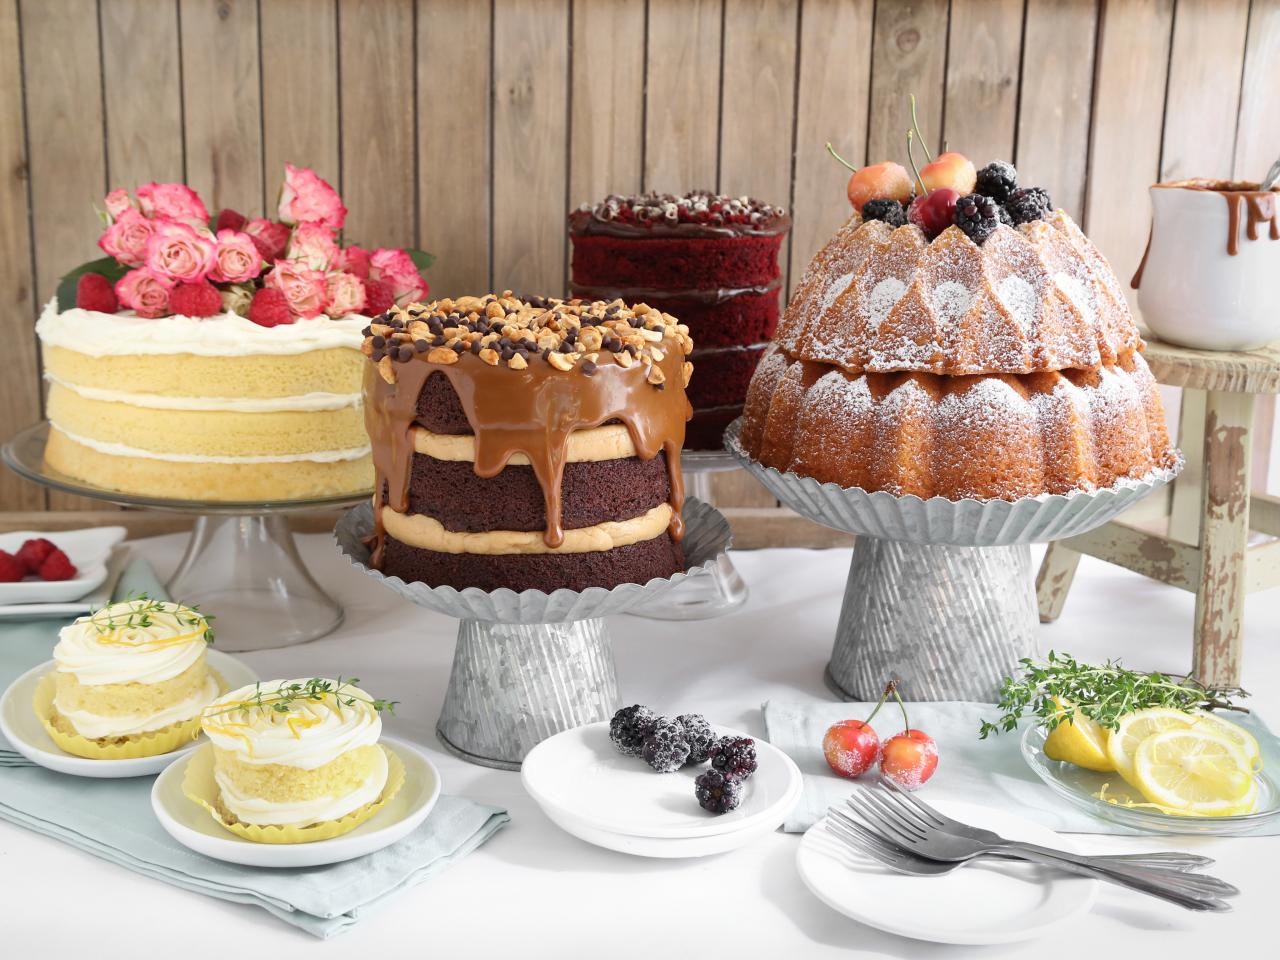 Selling Cakes From Home (UK): What You Need to Know